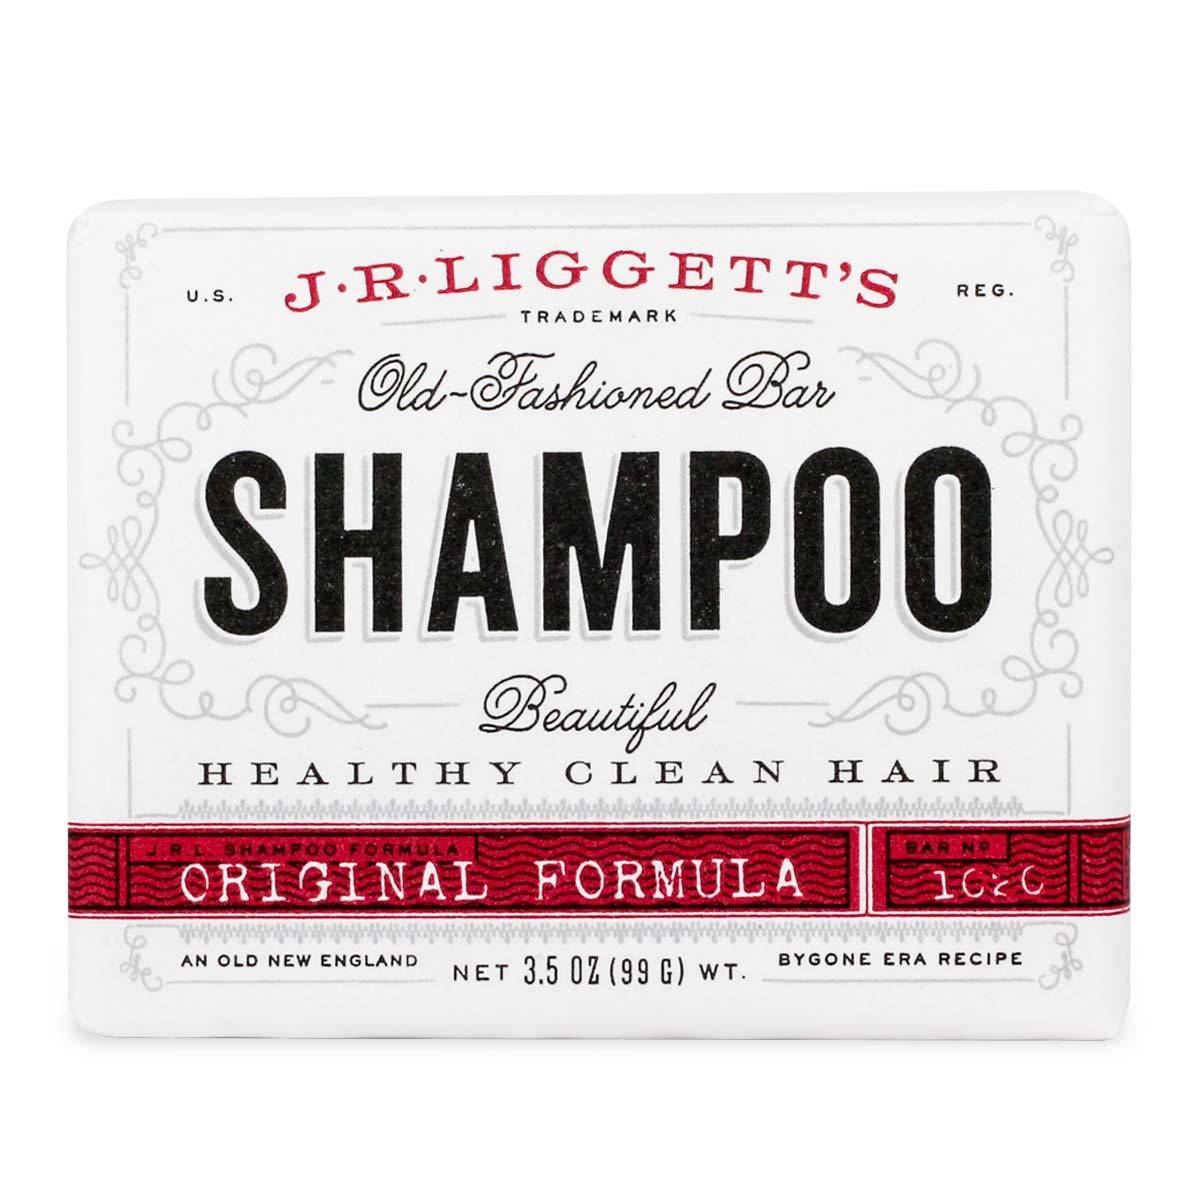 Primary image of The Original Old Fashioned Bar Shampoo